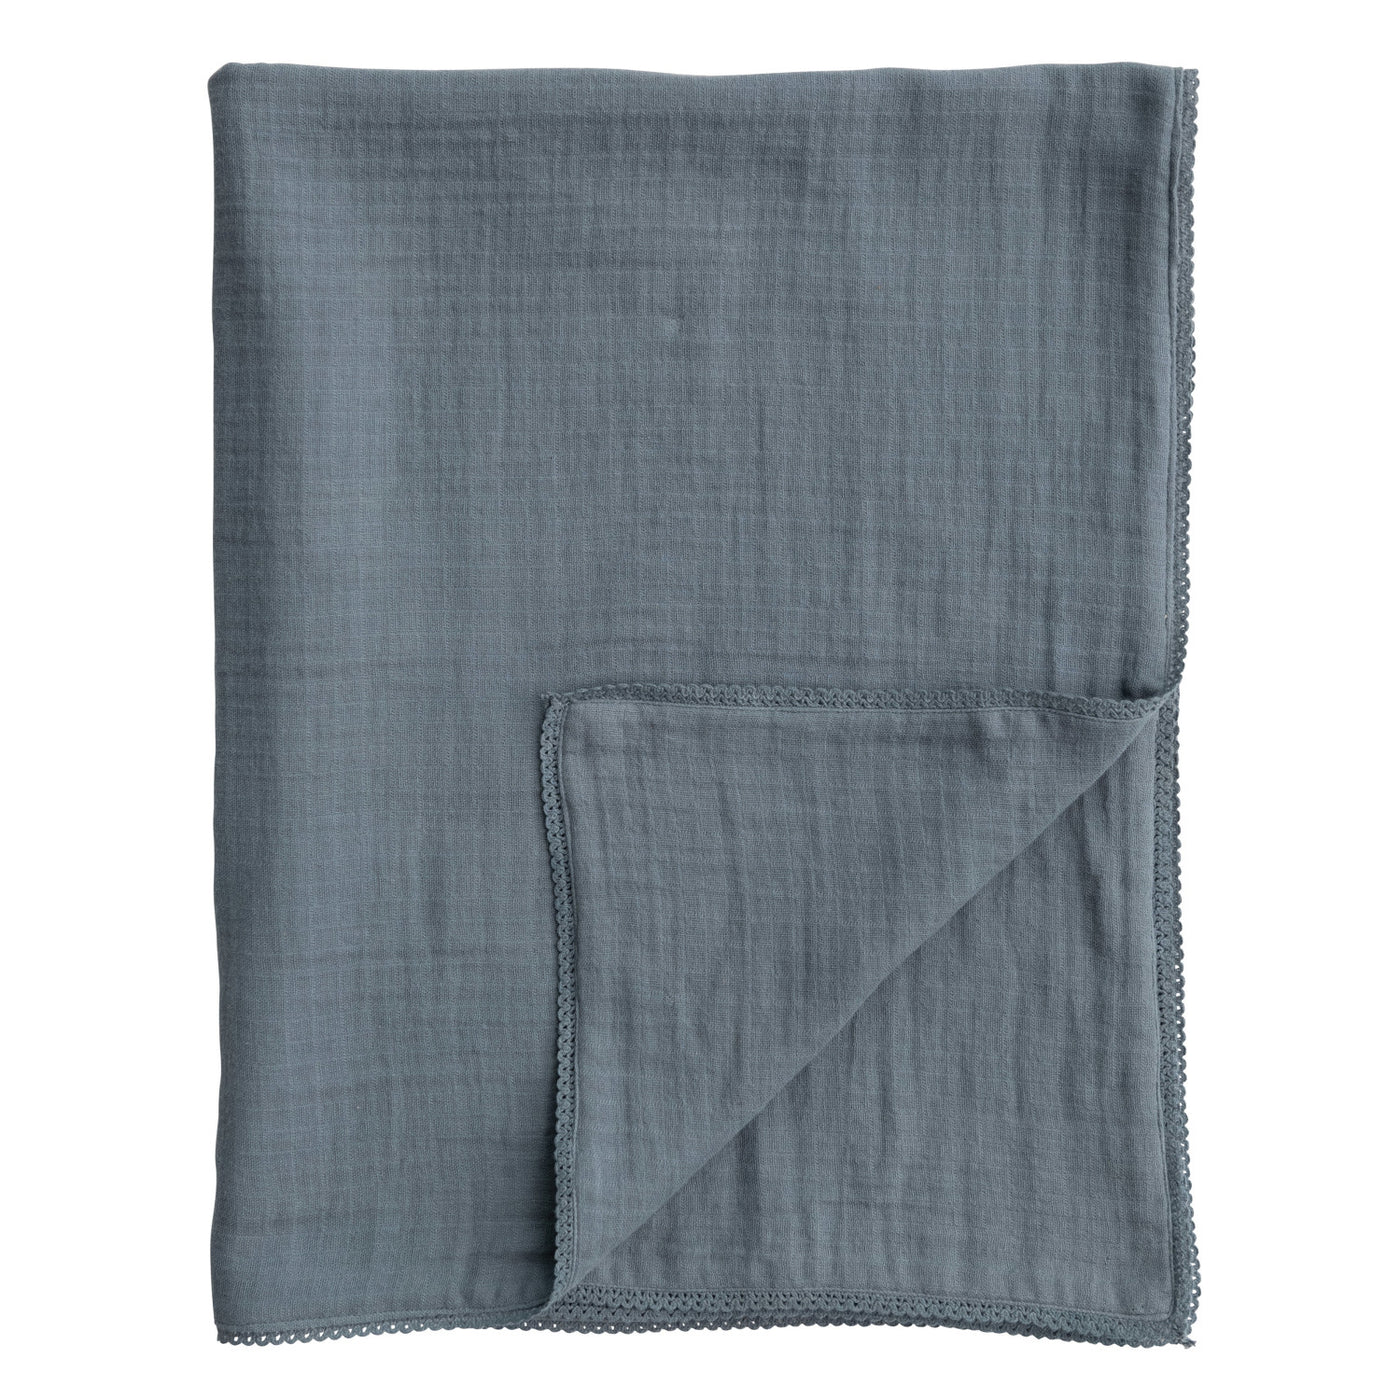 Blue Cotton Double Cloth Baby Blanket